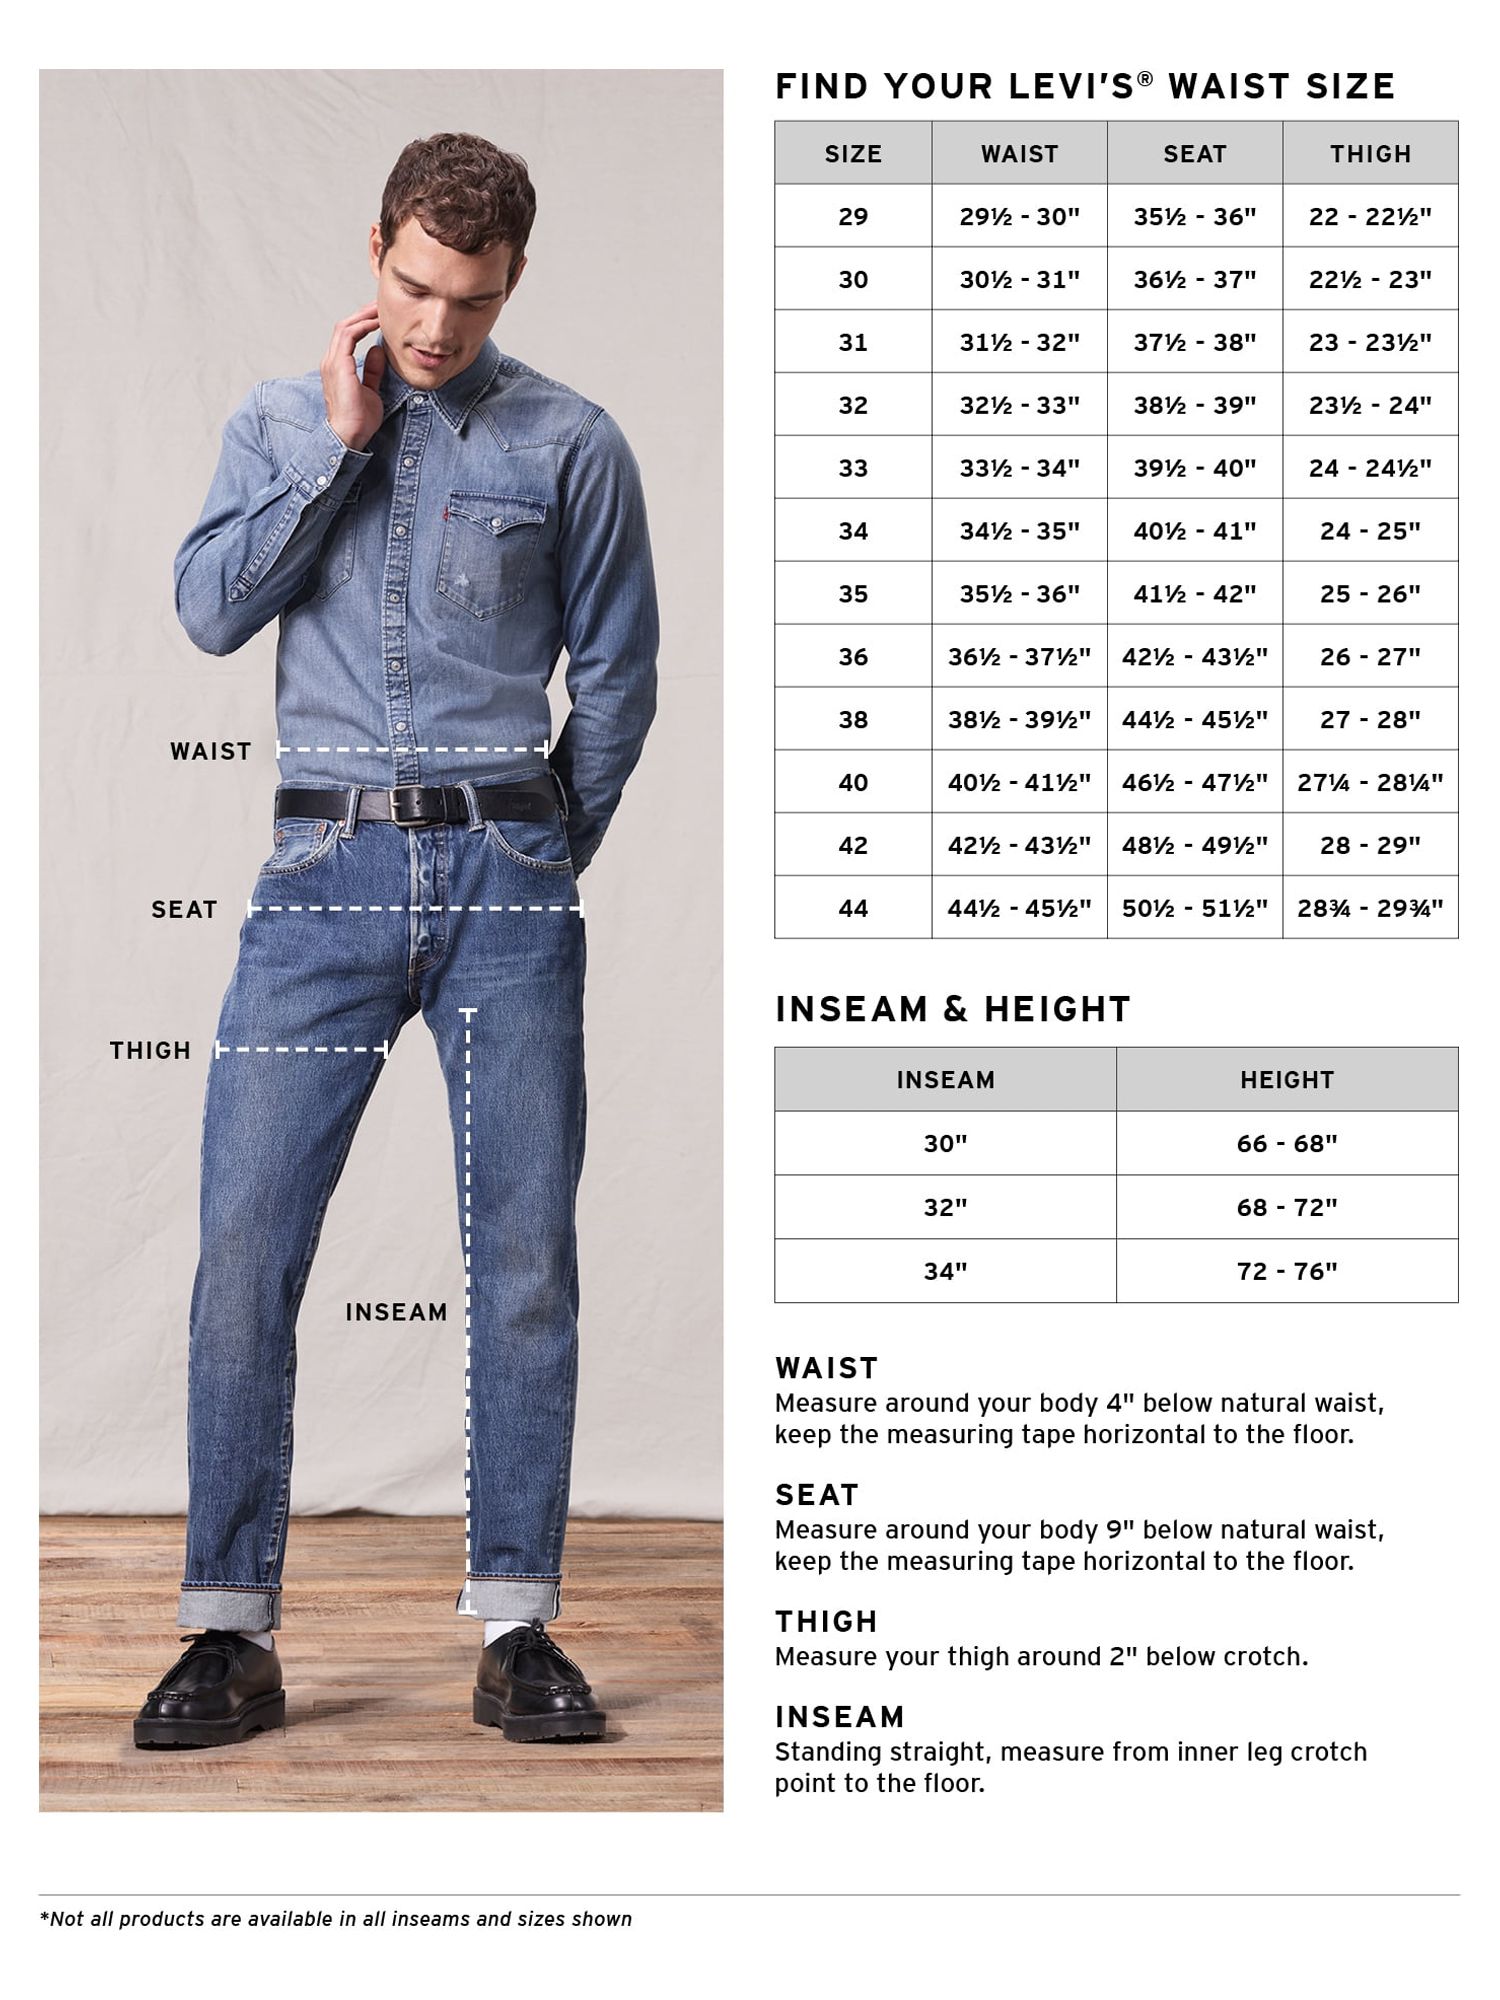 Levi's Men's 550 Relaxed Fit Jeans - image 3 of 7